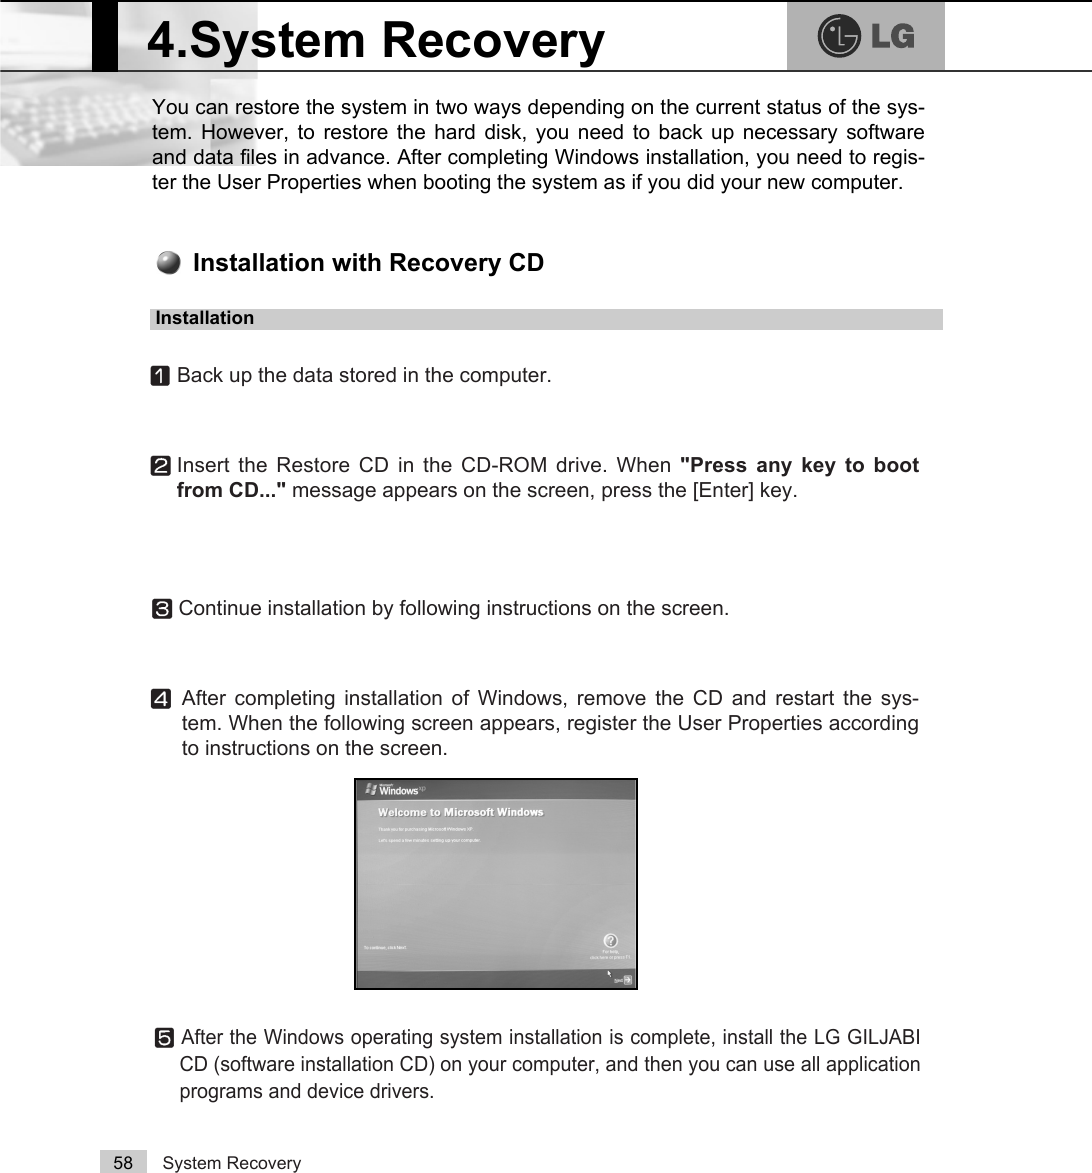 System Recovery58You can restore the system in two ways depending on the current status of the sys-tem. However, to restore the hard disk, you need to back up necessary softwareand data files in advance. After completing Windows installation, you need to regis-ter the User Properties when booting the system as if you did your new computer.4.System RecoveryⓞBack up the data stored in the computer.ⓟInsert the Restore CD in the CD-ROM drive. When &quot;Press any key to bootfrom CD...&quot; message appears on the screen, press the [Enter] key. ⓠContinue installation by following instructions on the screen. ⓡAfter completing installation of Windows, remove the CD and restart the sys-tem. When the following screen appears, register the User Properties accordingto instructions on the screen. Installation with Recovery CDInstallationⓢAfter the Windows operating system installation is complete, install the LG GILJABICD (software installation CD) on your computer, and then you can use all applicationprograms and device drivers. 